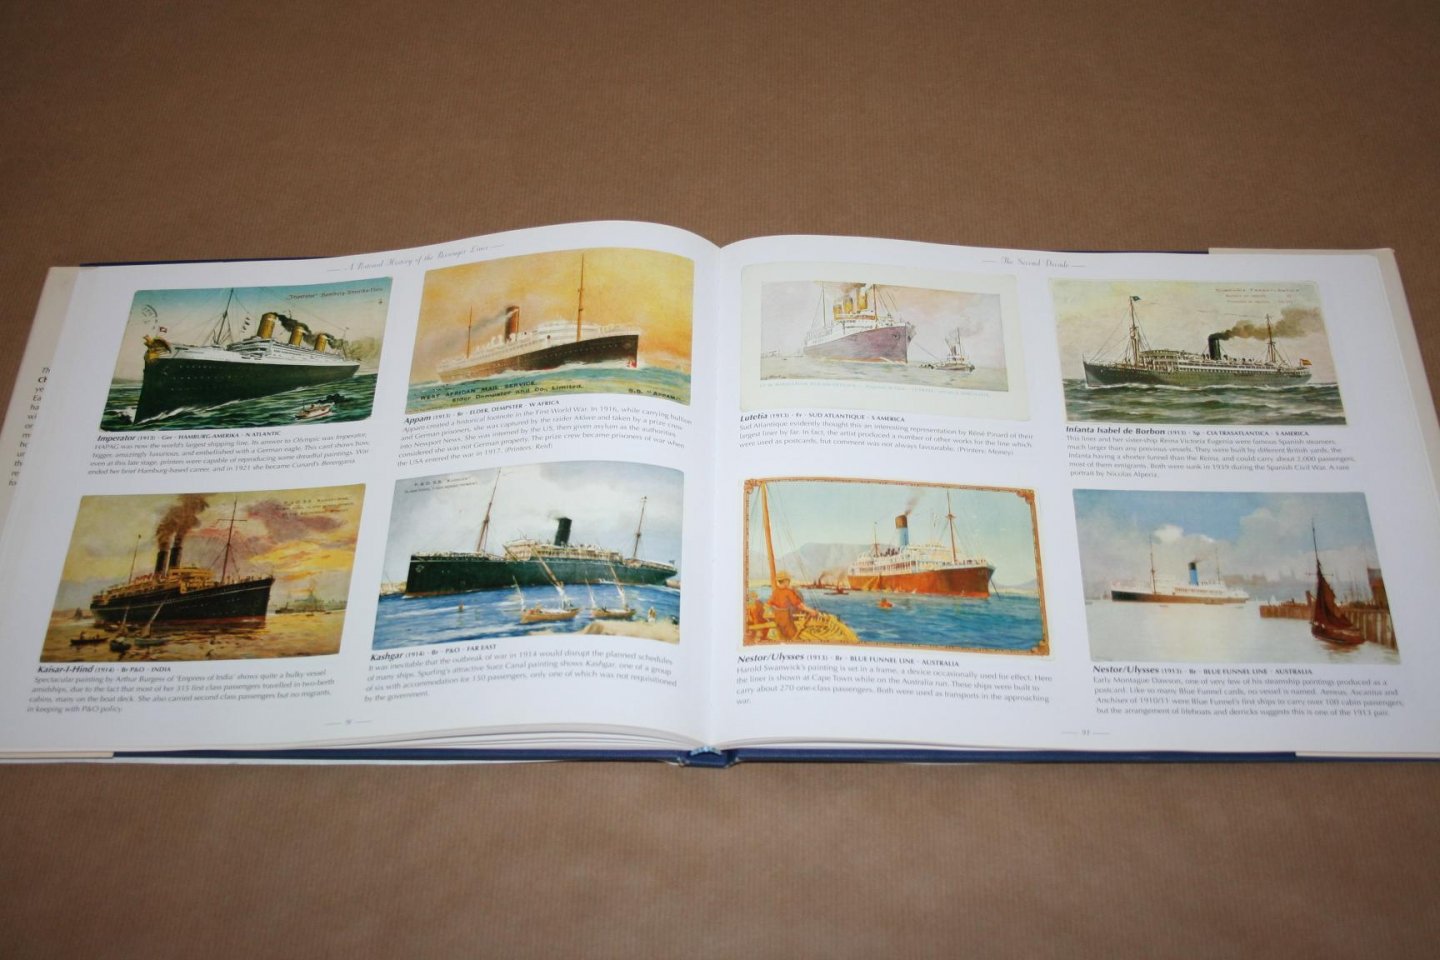 Christopher Deakes - A Postcard History of the Passenger Liner